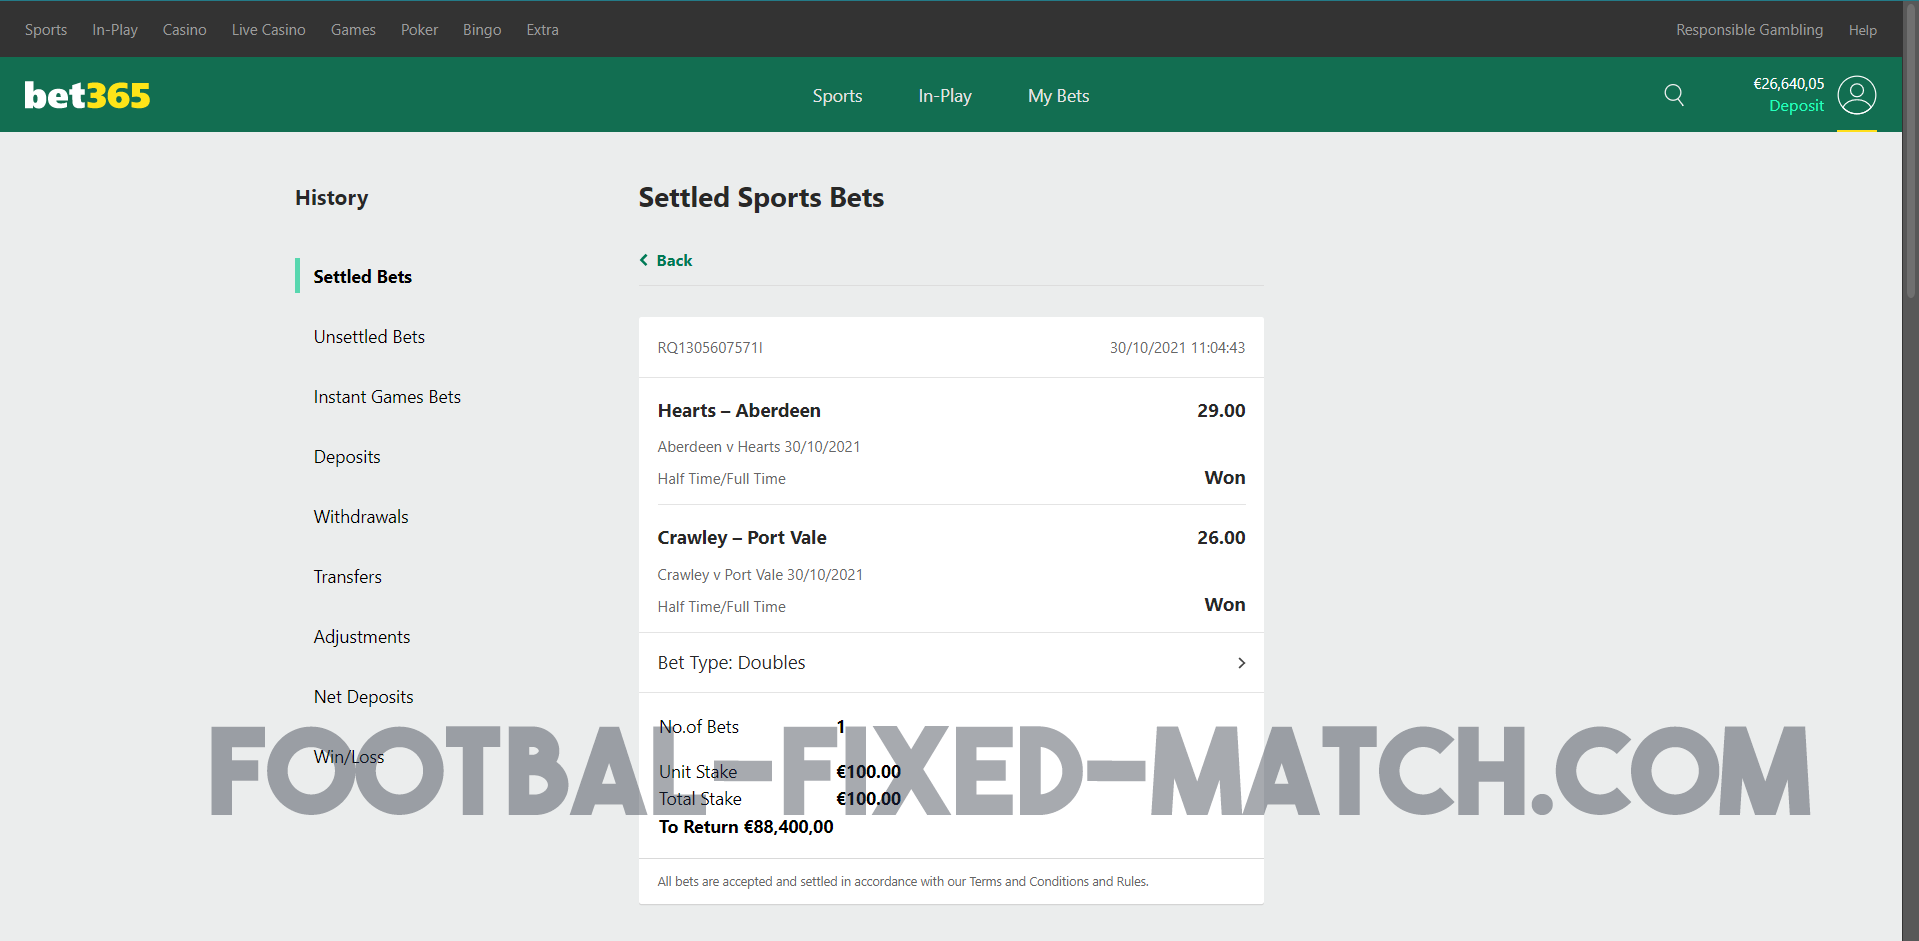 HT FT FIXED MATCHES